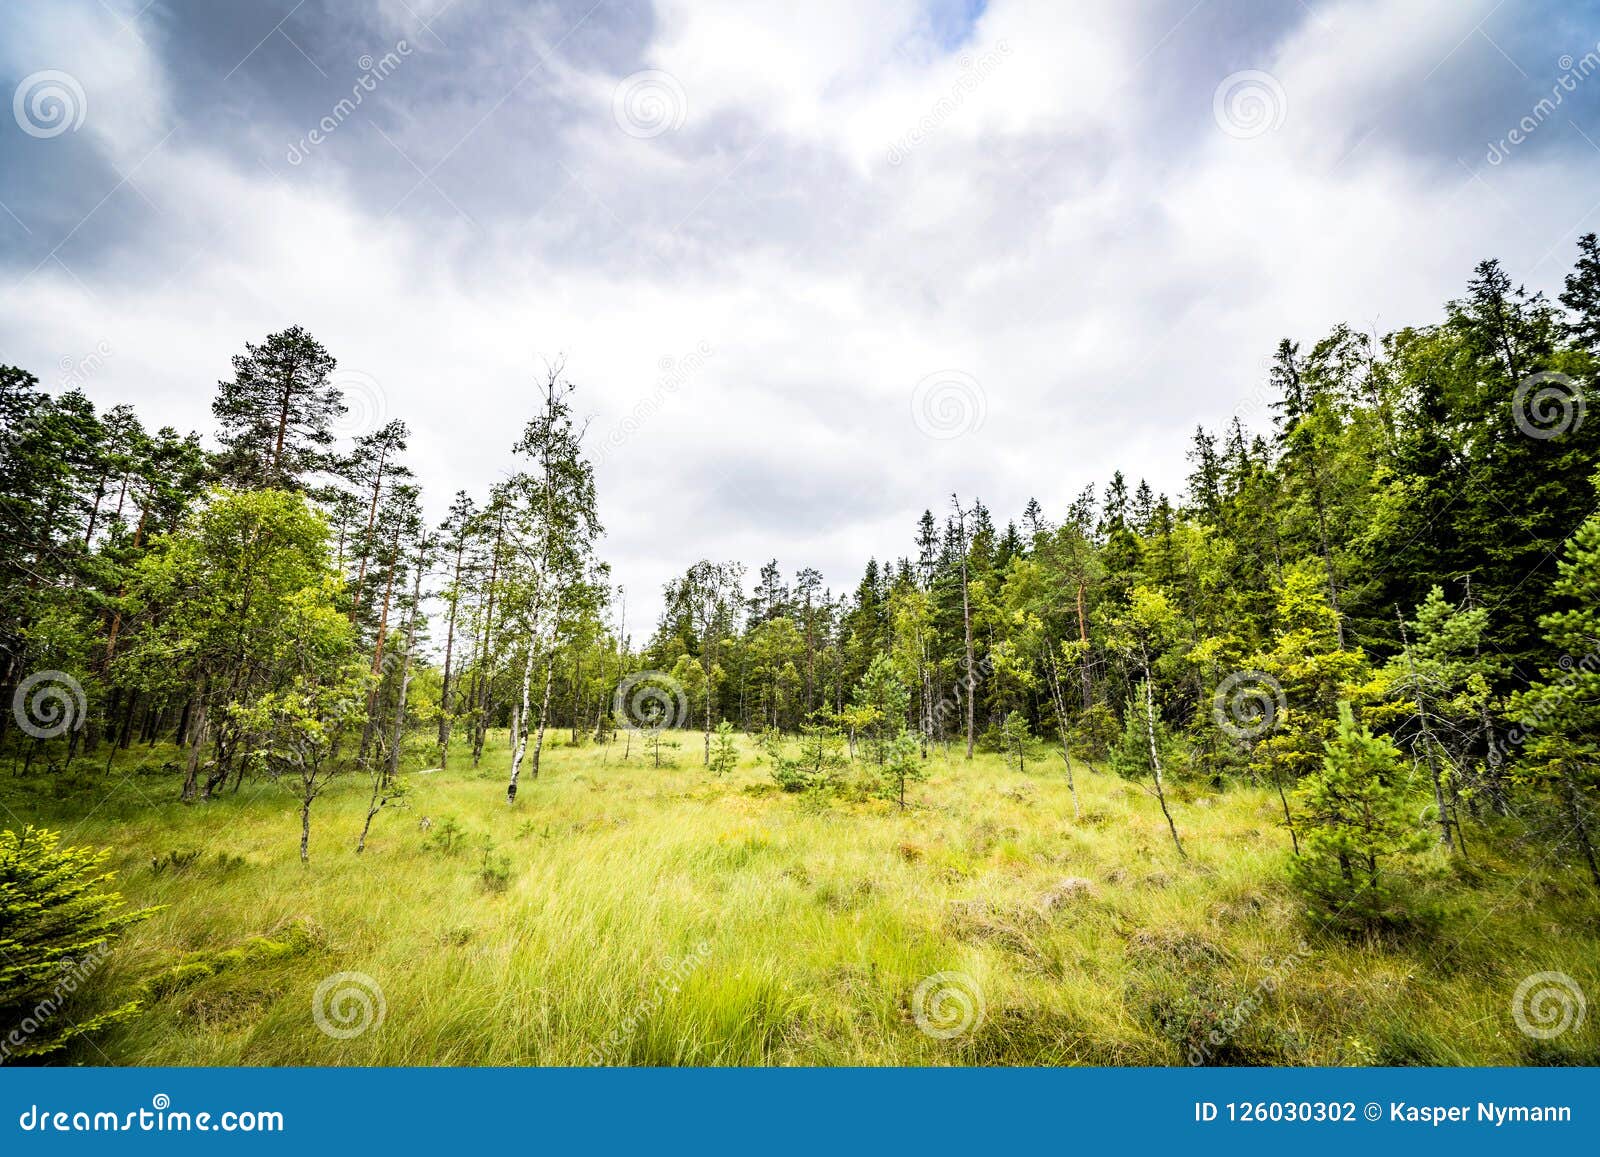 clearing in a forest with tall green grass